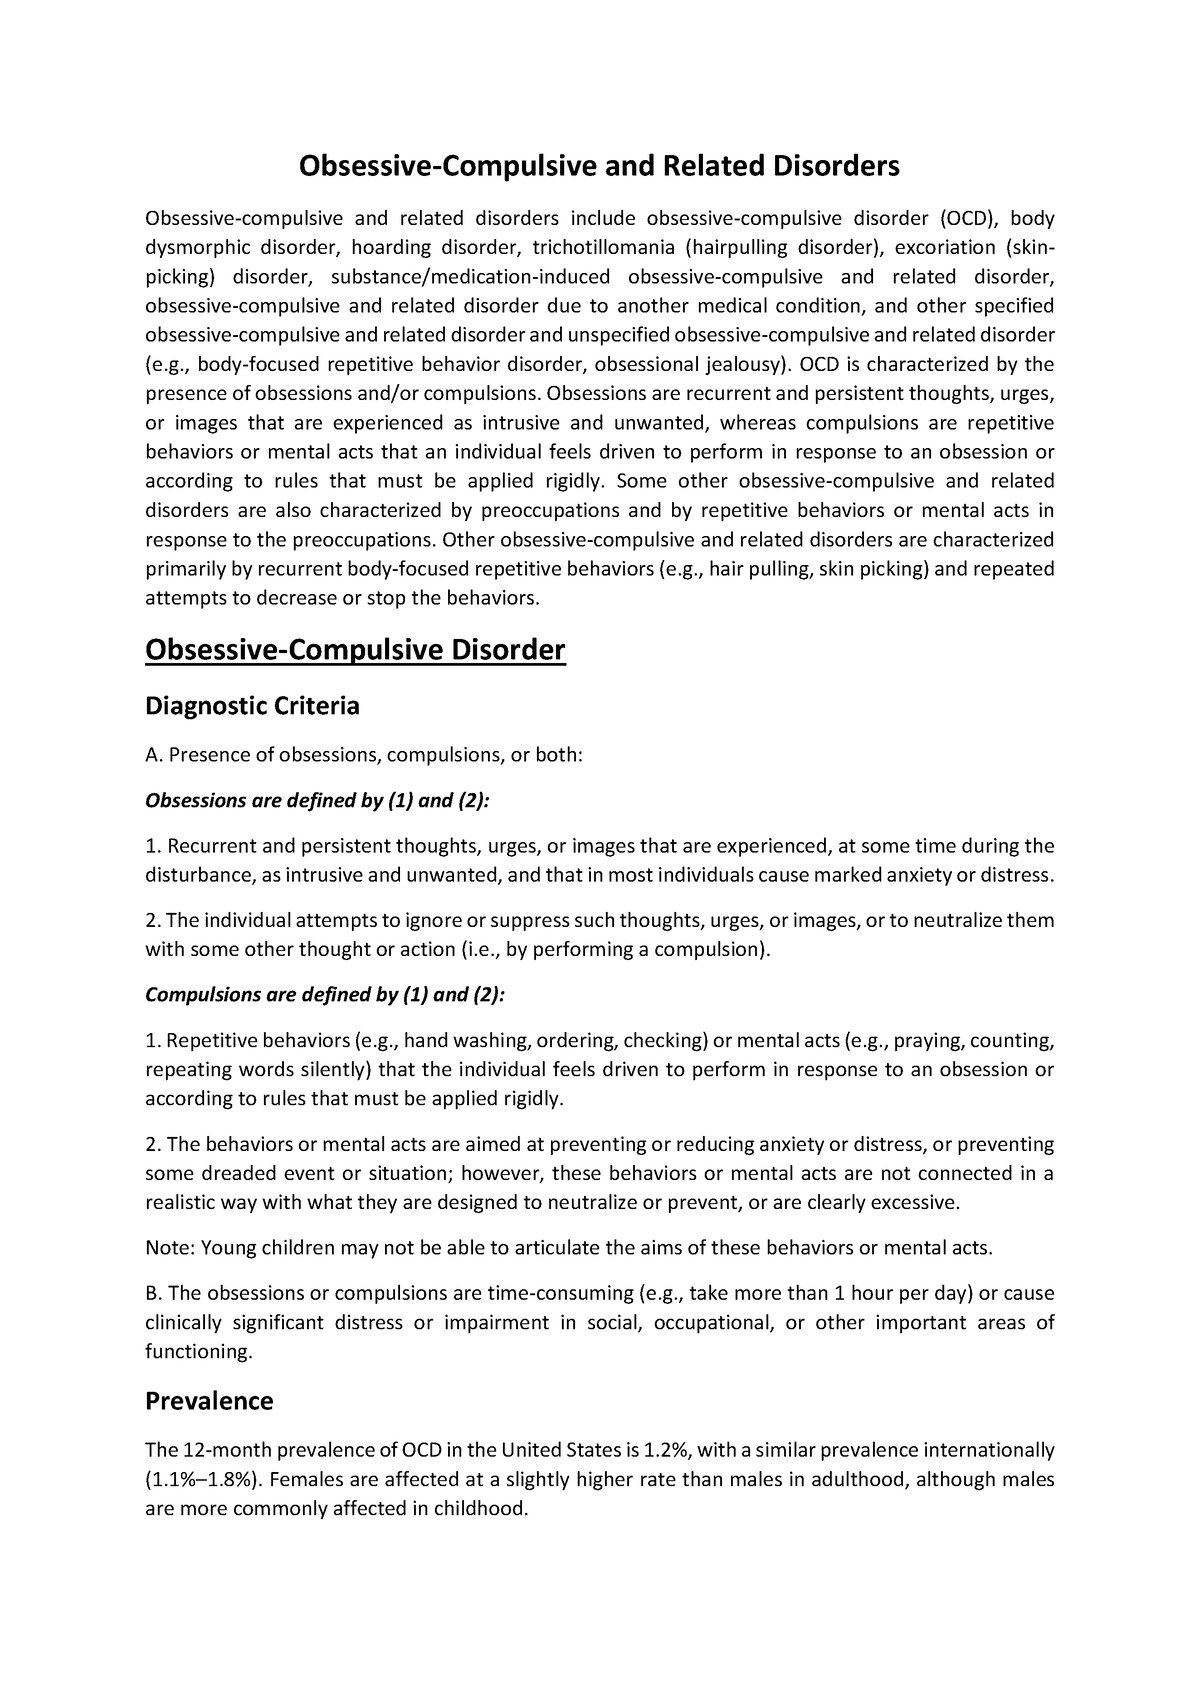 chapter 5 case study for obsessive compulsive and related disorders katherine